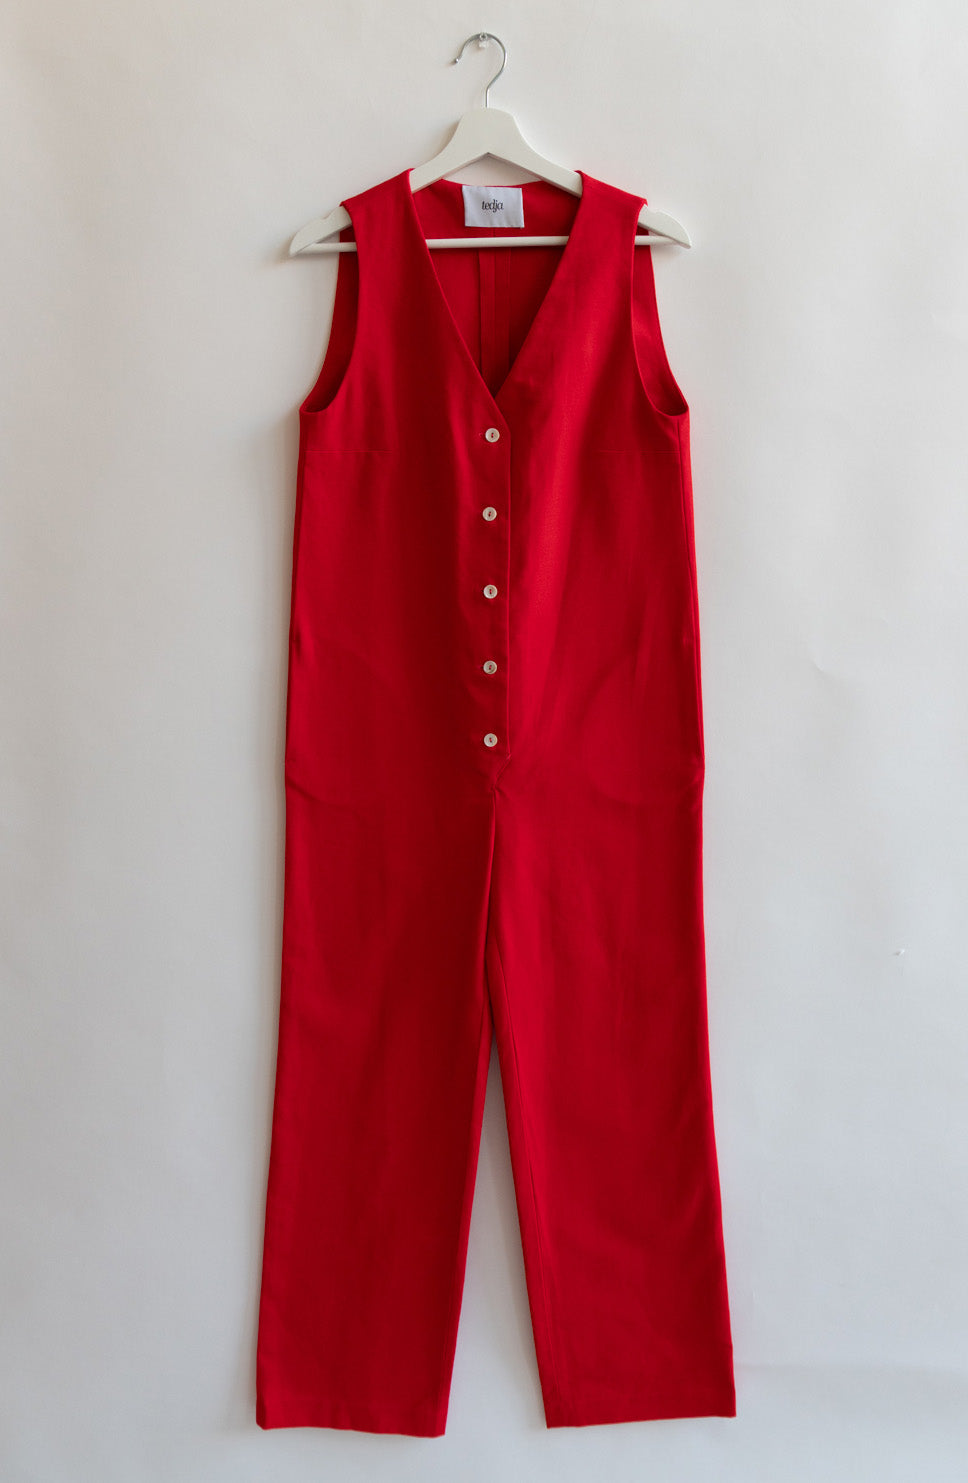 red color Jumpsuit overall workwear cotton canvas with pockets 5 buttons v-neck tall girls short girls oeko-tex sustainable clothes handmade